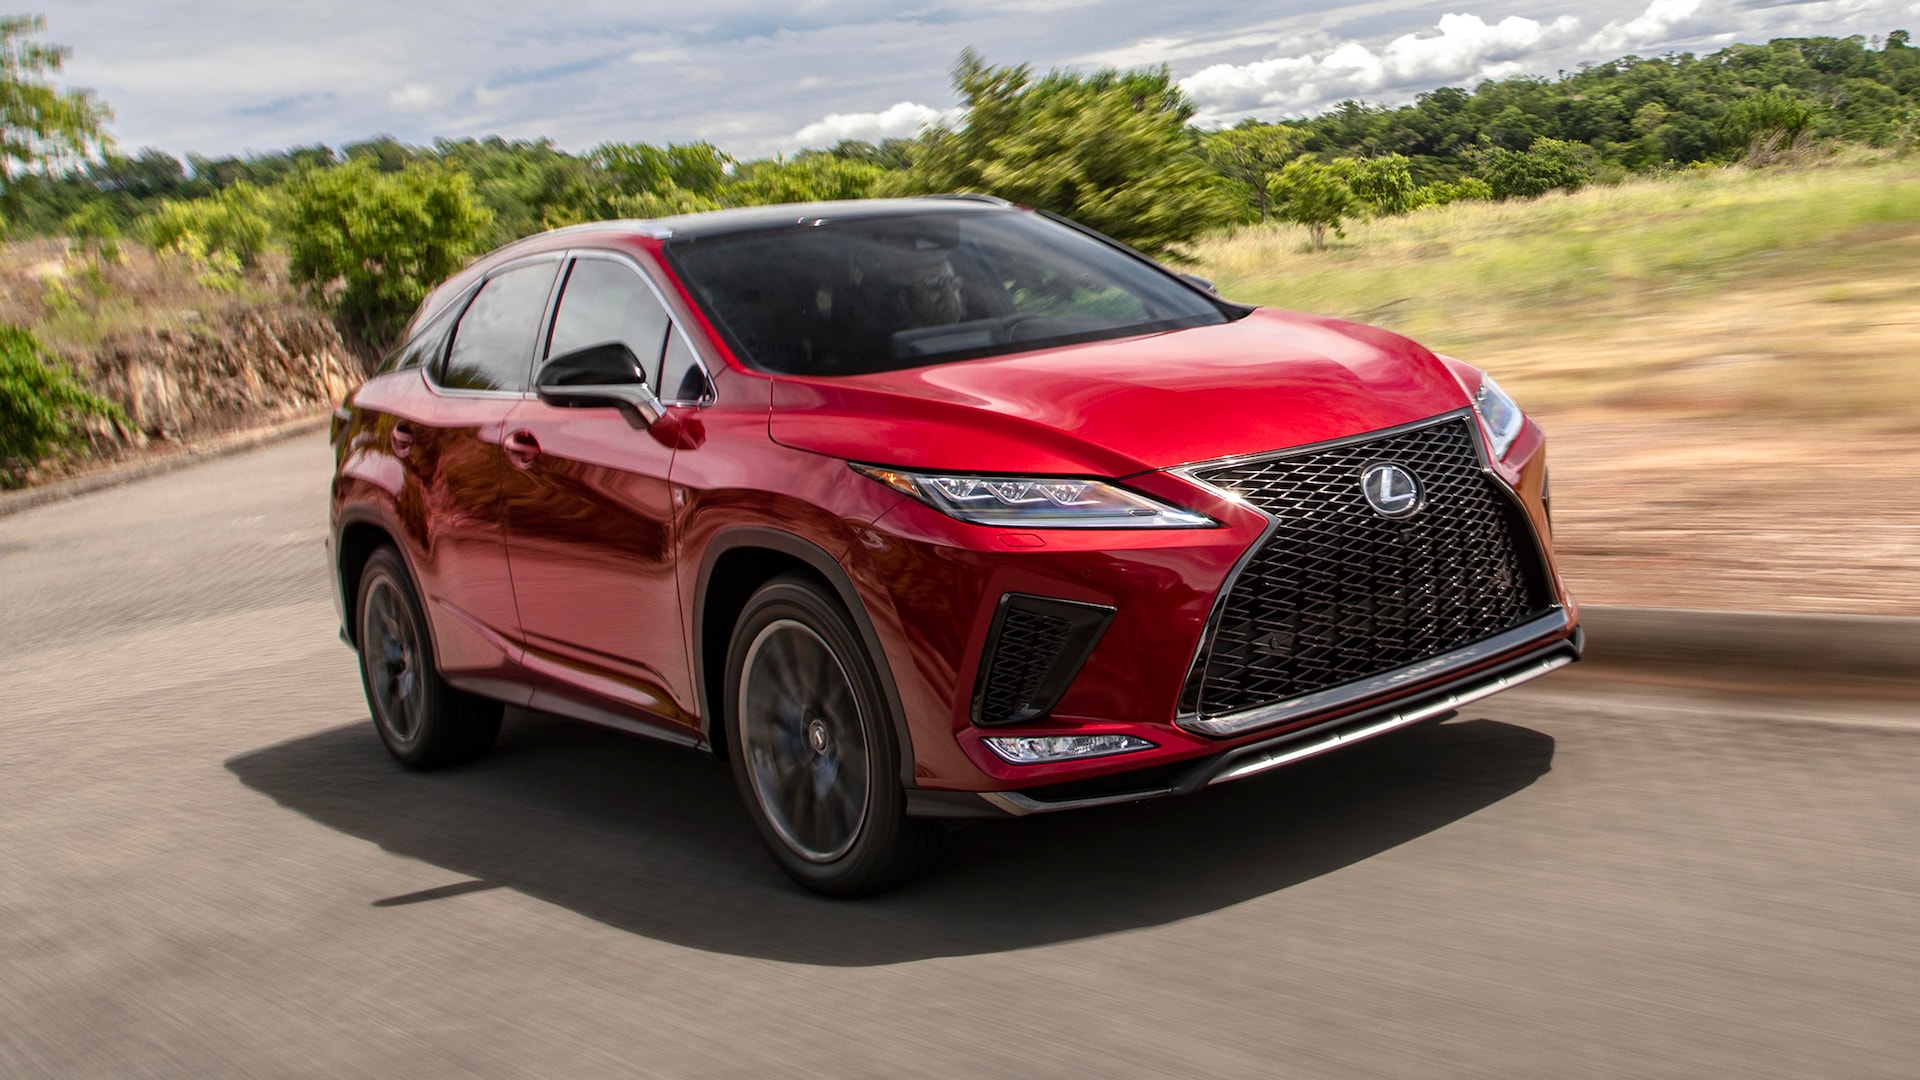 2020 Lexus RX 350 Price Increase Comes With Updated Tech